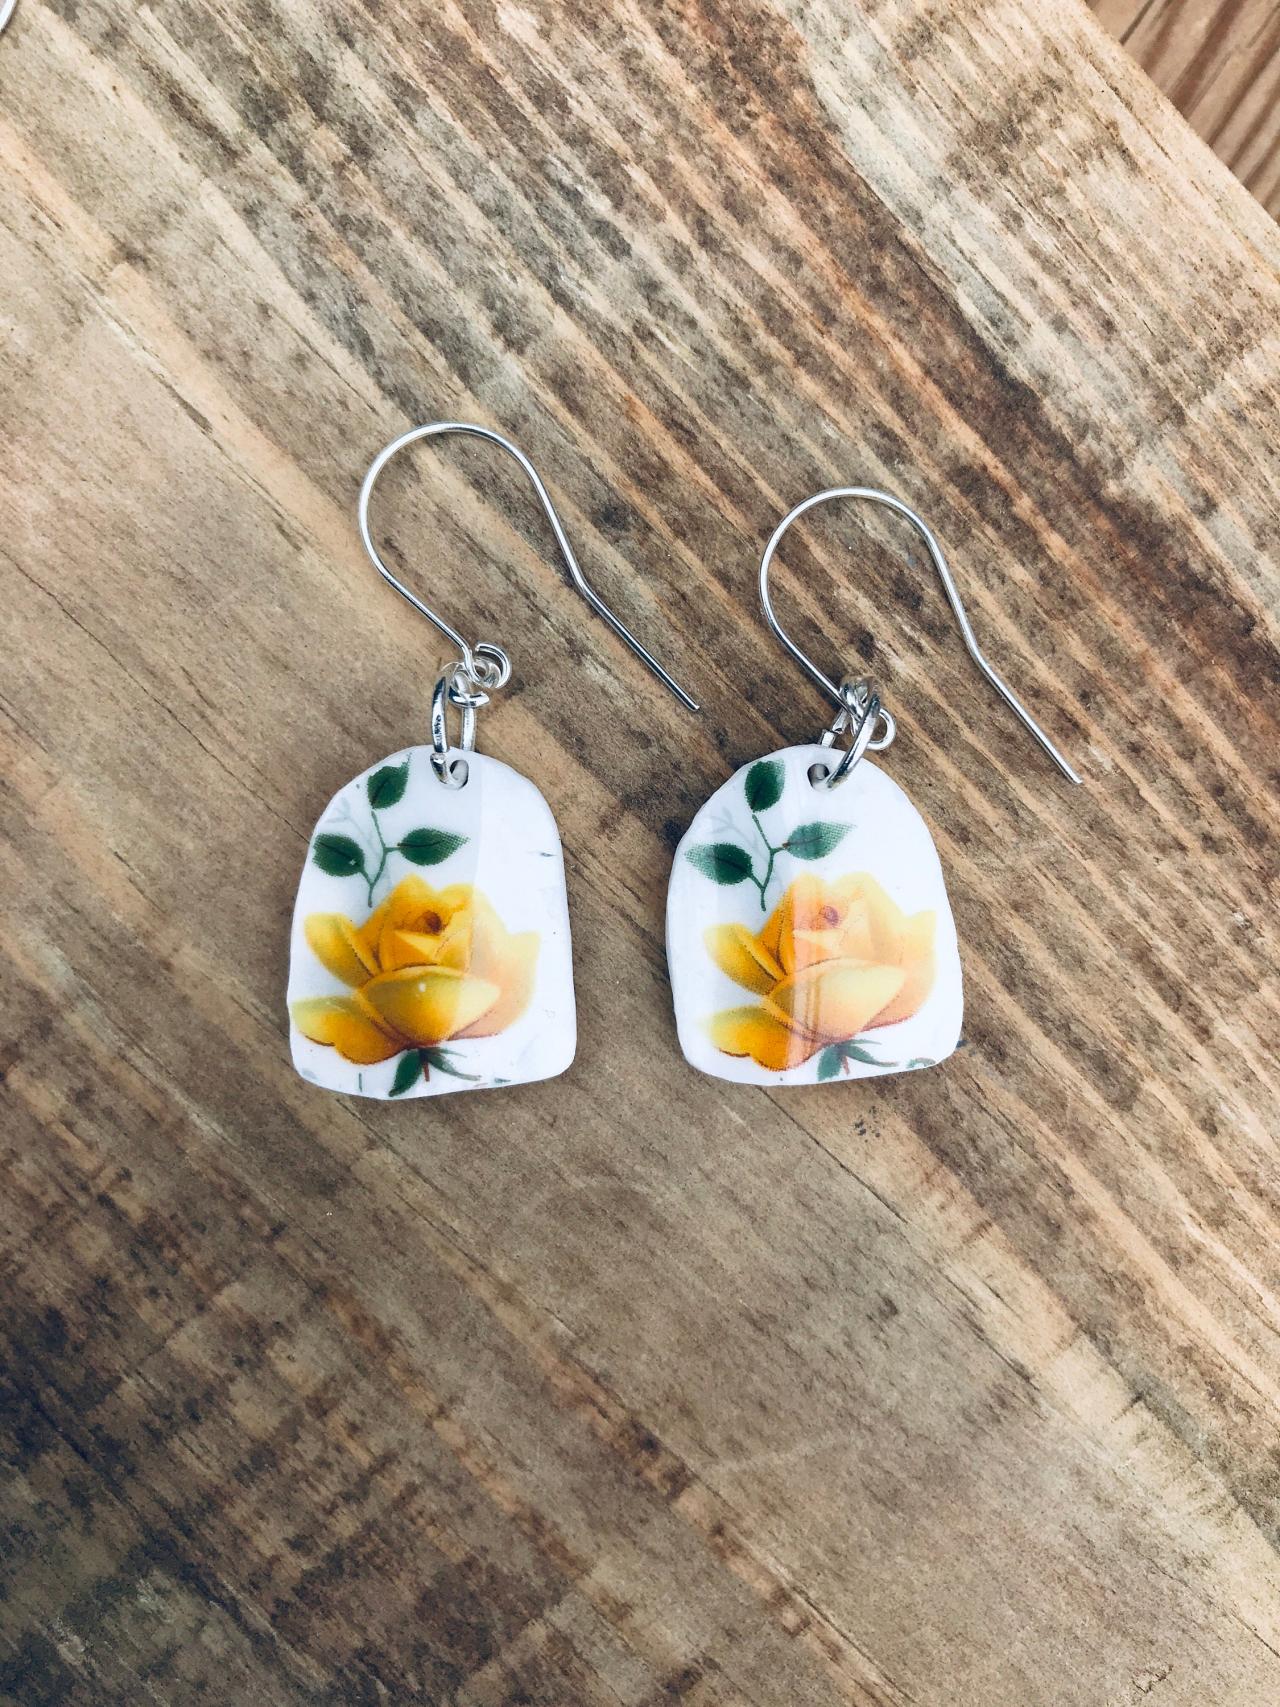 Gorgeous yellow rose vintage recycled broken China earrings with sterling silver wires.